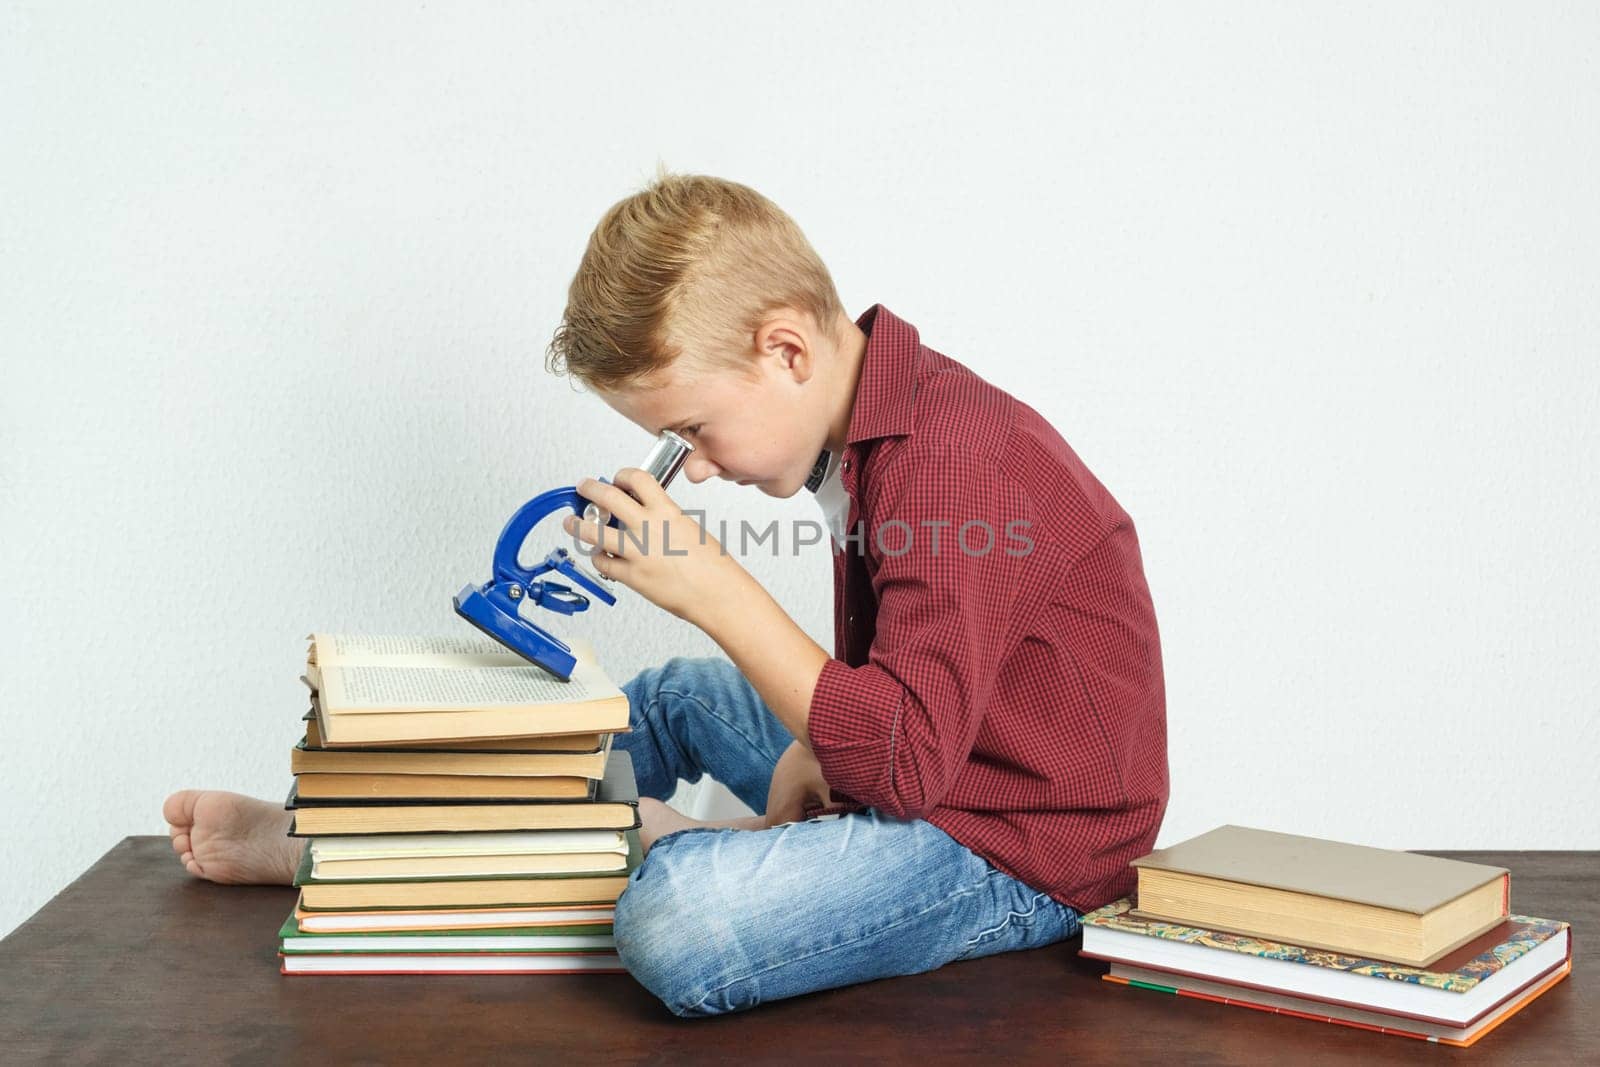 A schoolboy sits at a table near books and looks through a microscope. by Sd28DimoN_1976